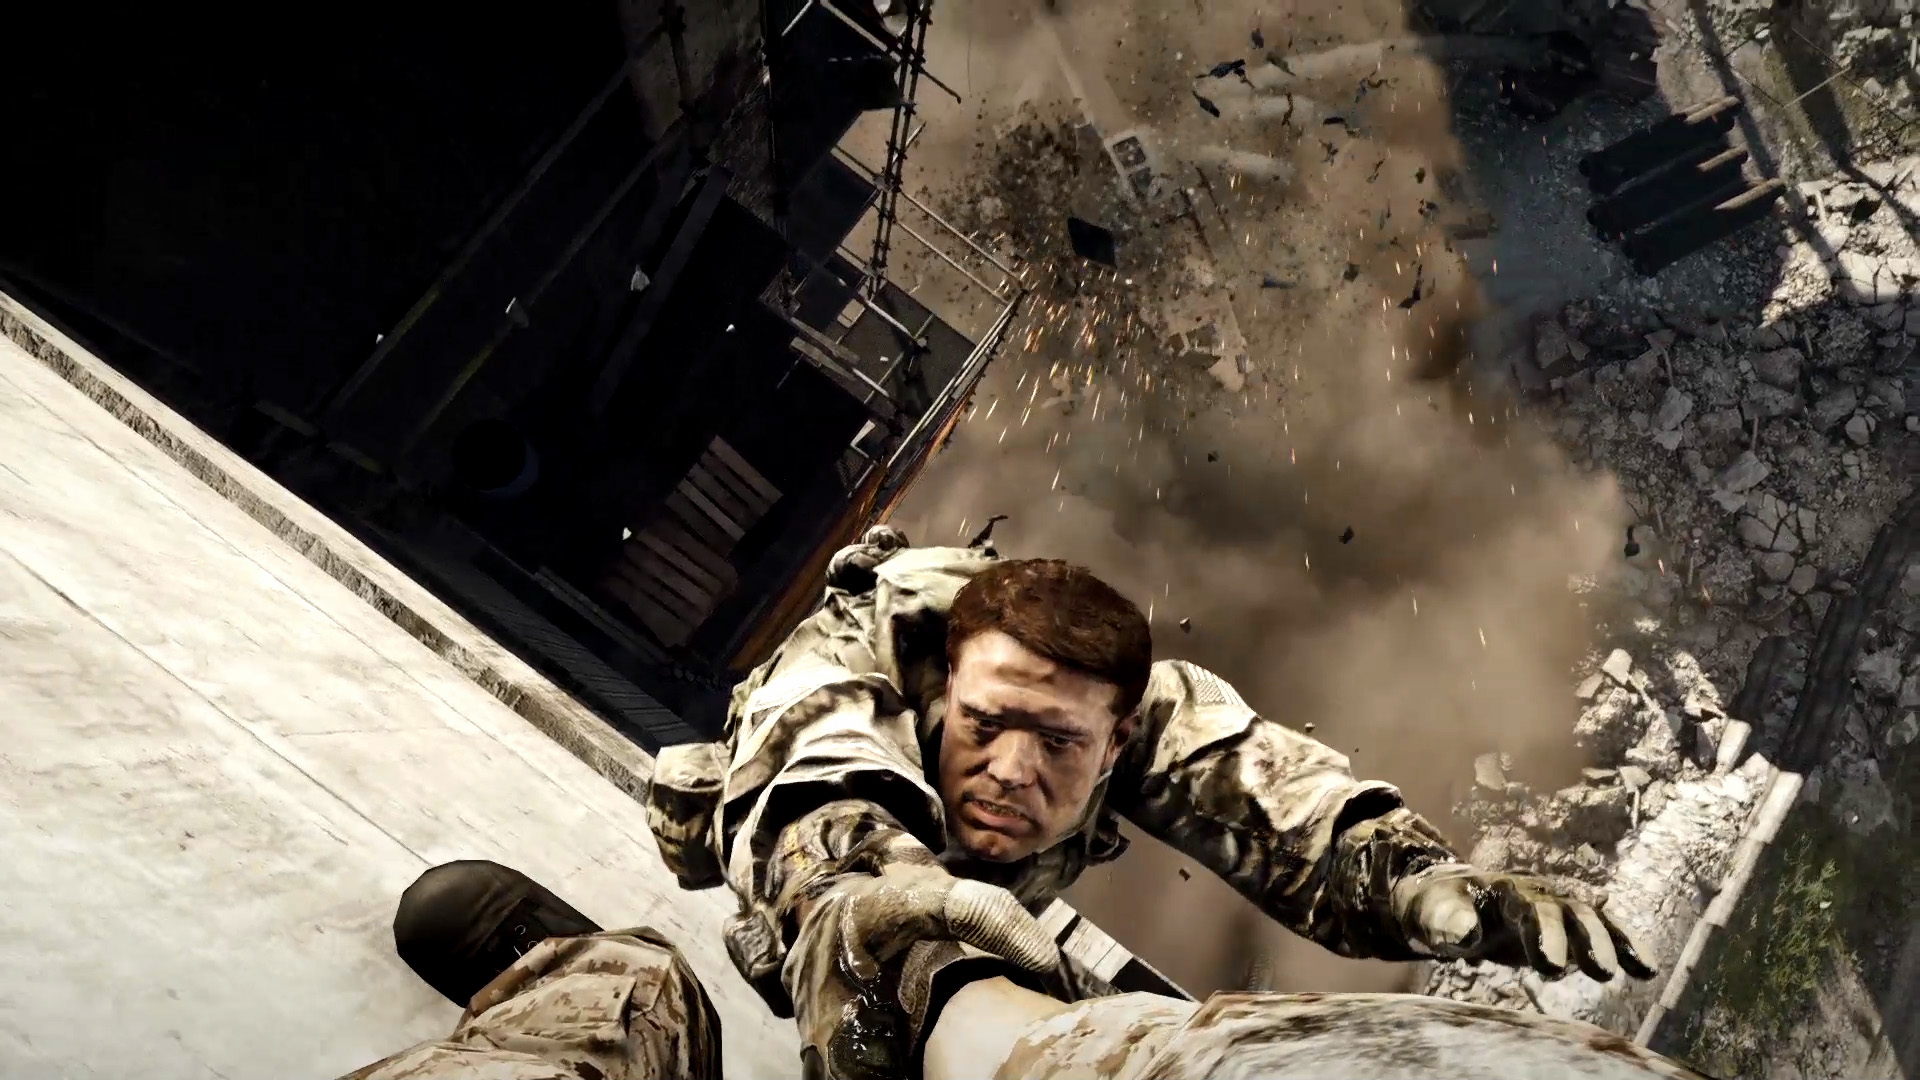 Battlefield 4 Dev: We Did Not Compromised It On PS3 And Xbox 360